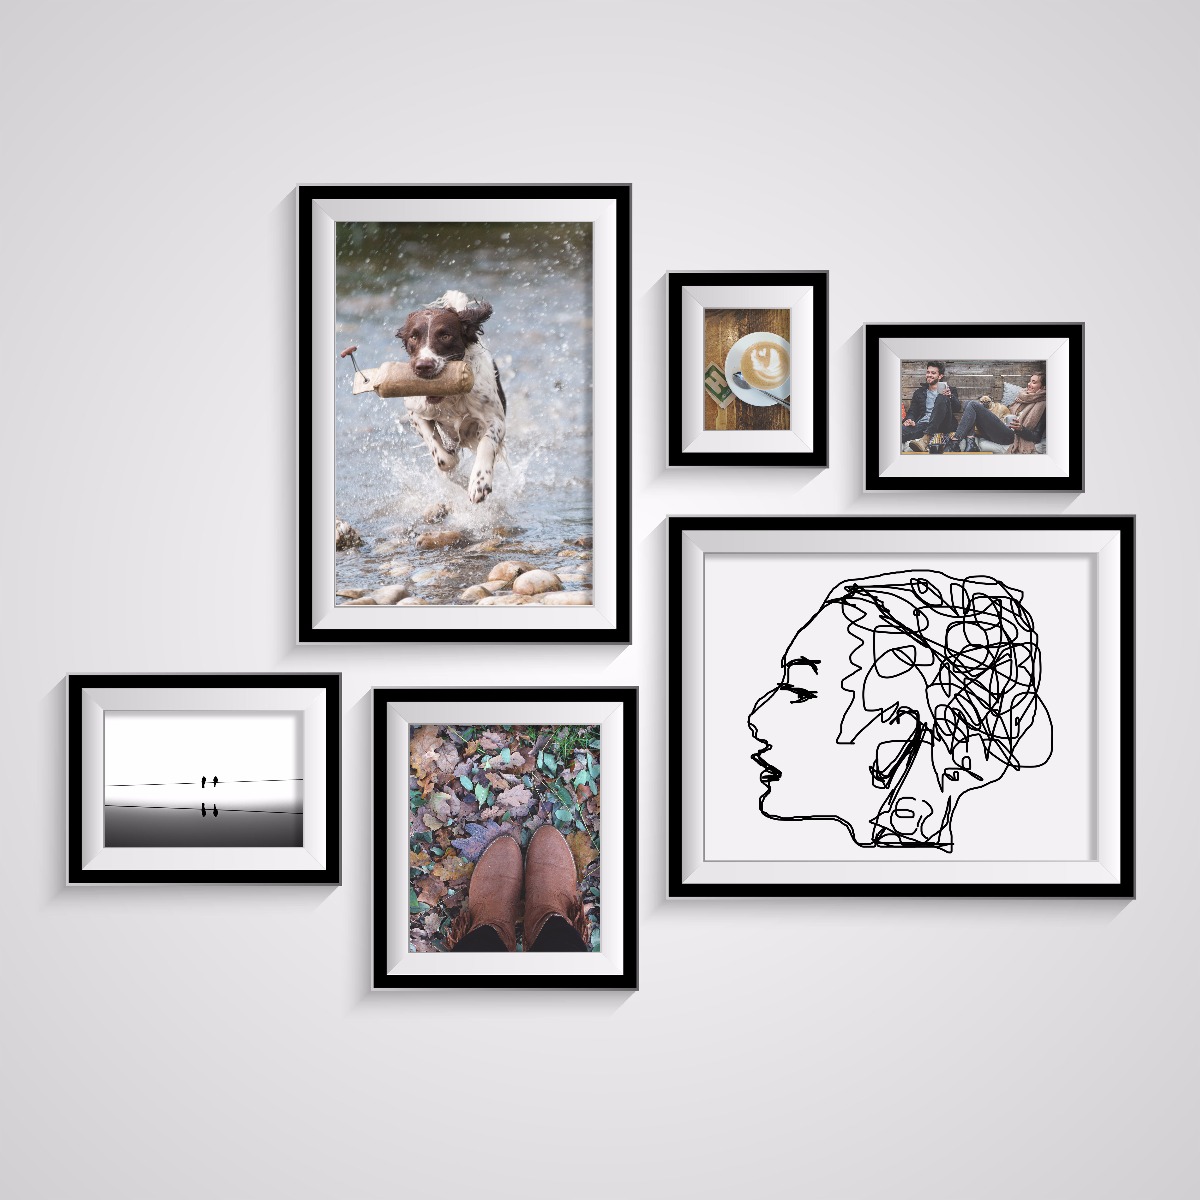 Best Ever 30 X 30 Photo Frame | Decor & Design Ideas in HD Images